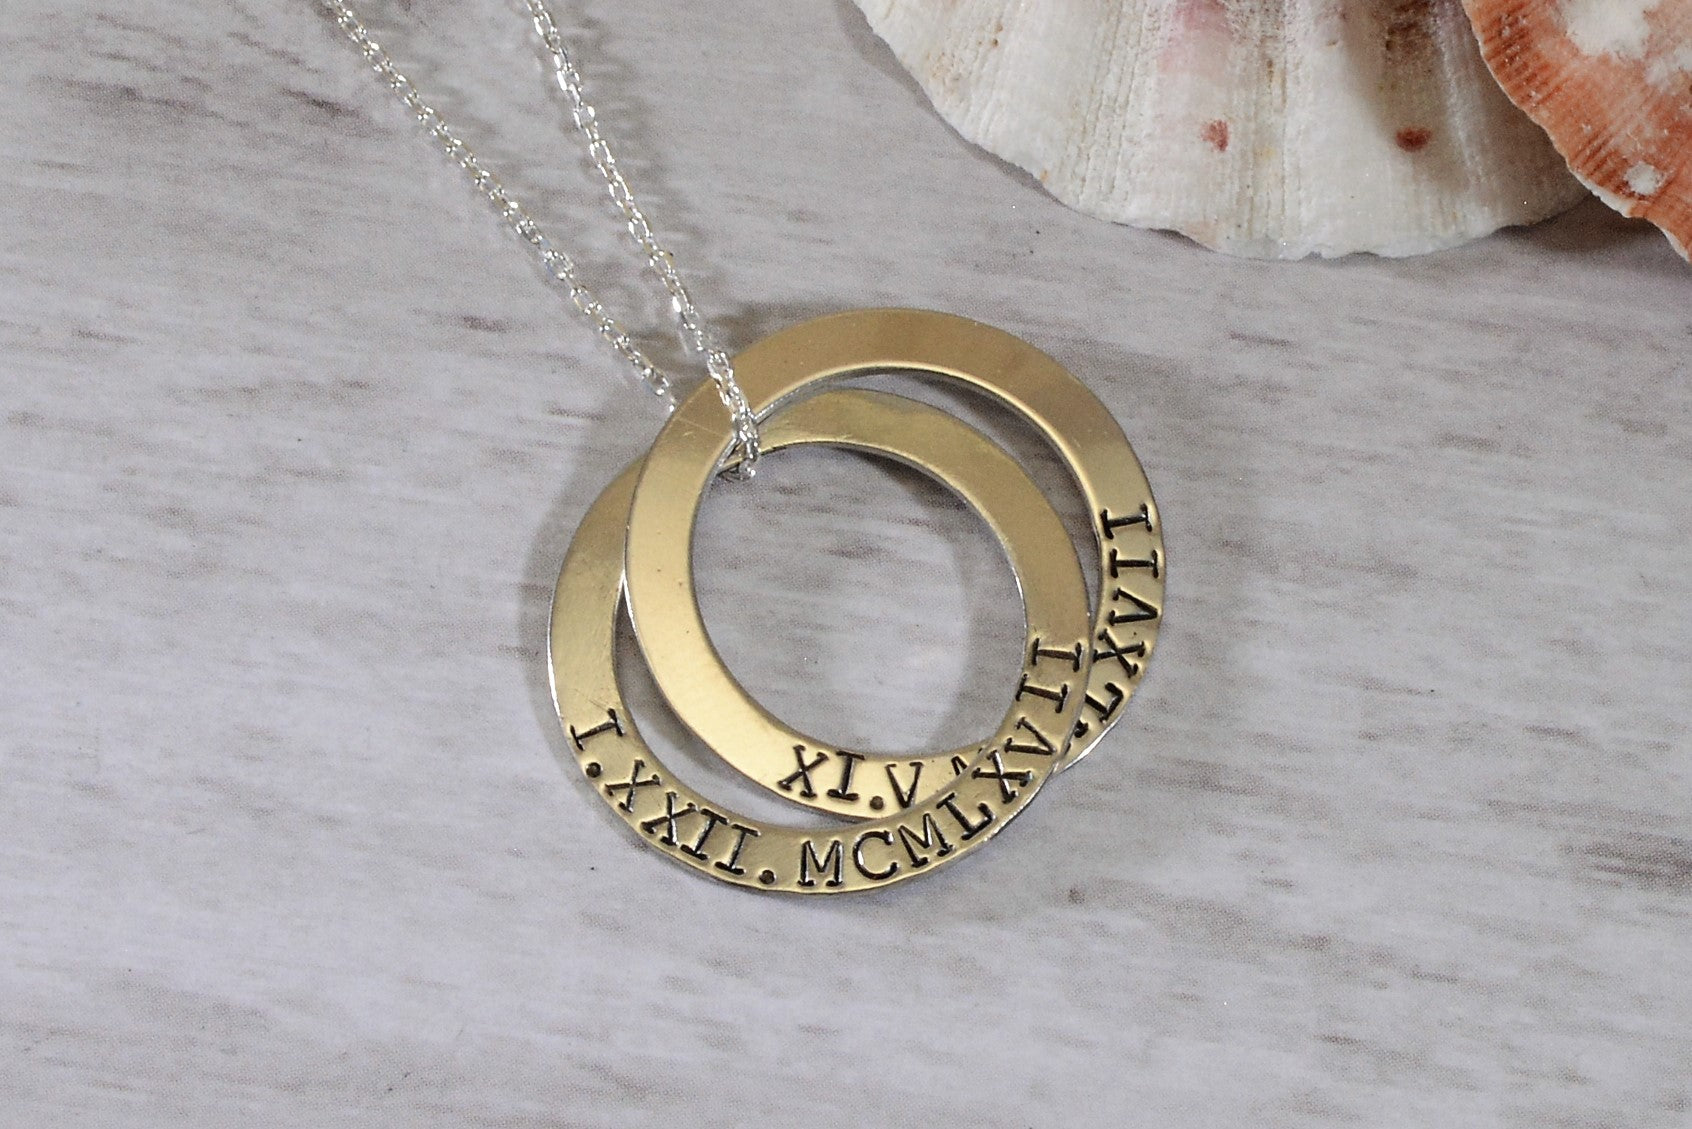 Family Birthstone Necklace | Silver Interlocking Circle – The Silver Wing